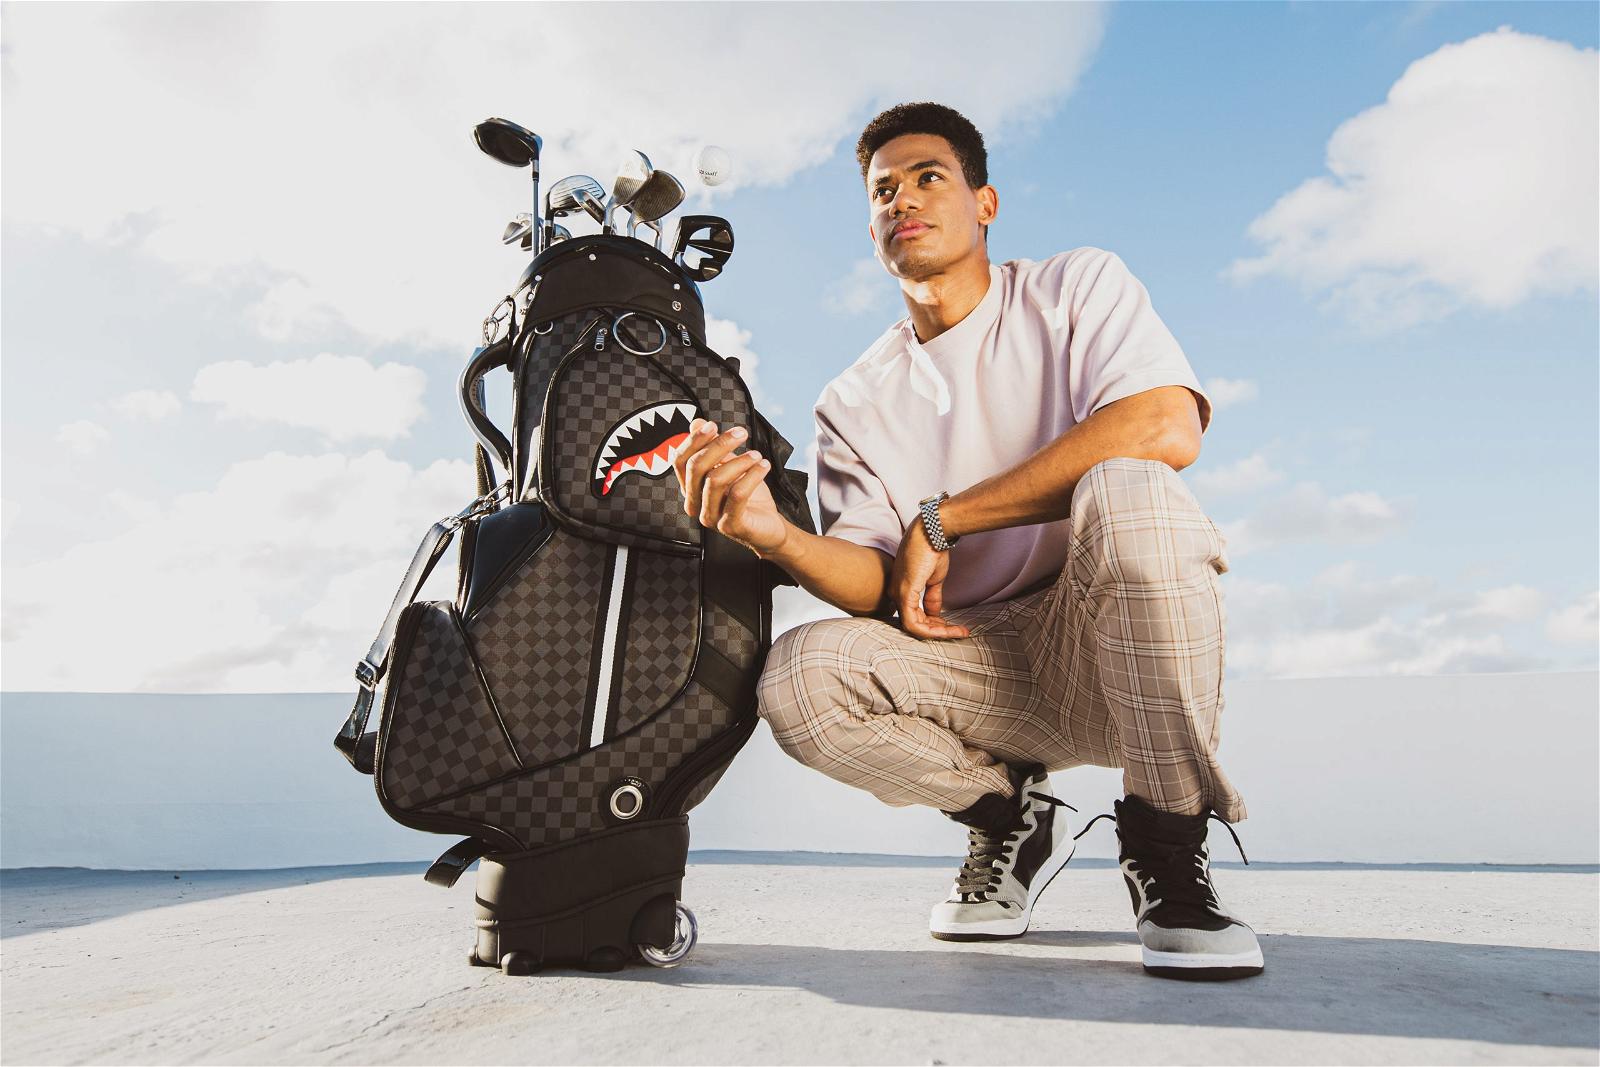 Sprayground Delivers First Every Capsule Collection for Golfers